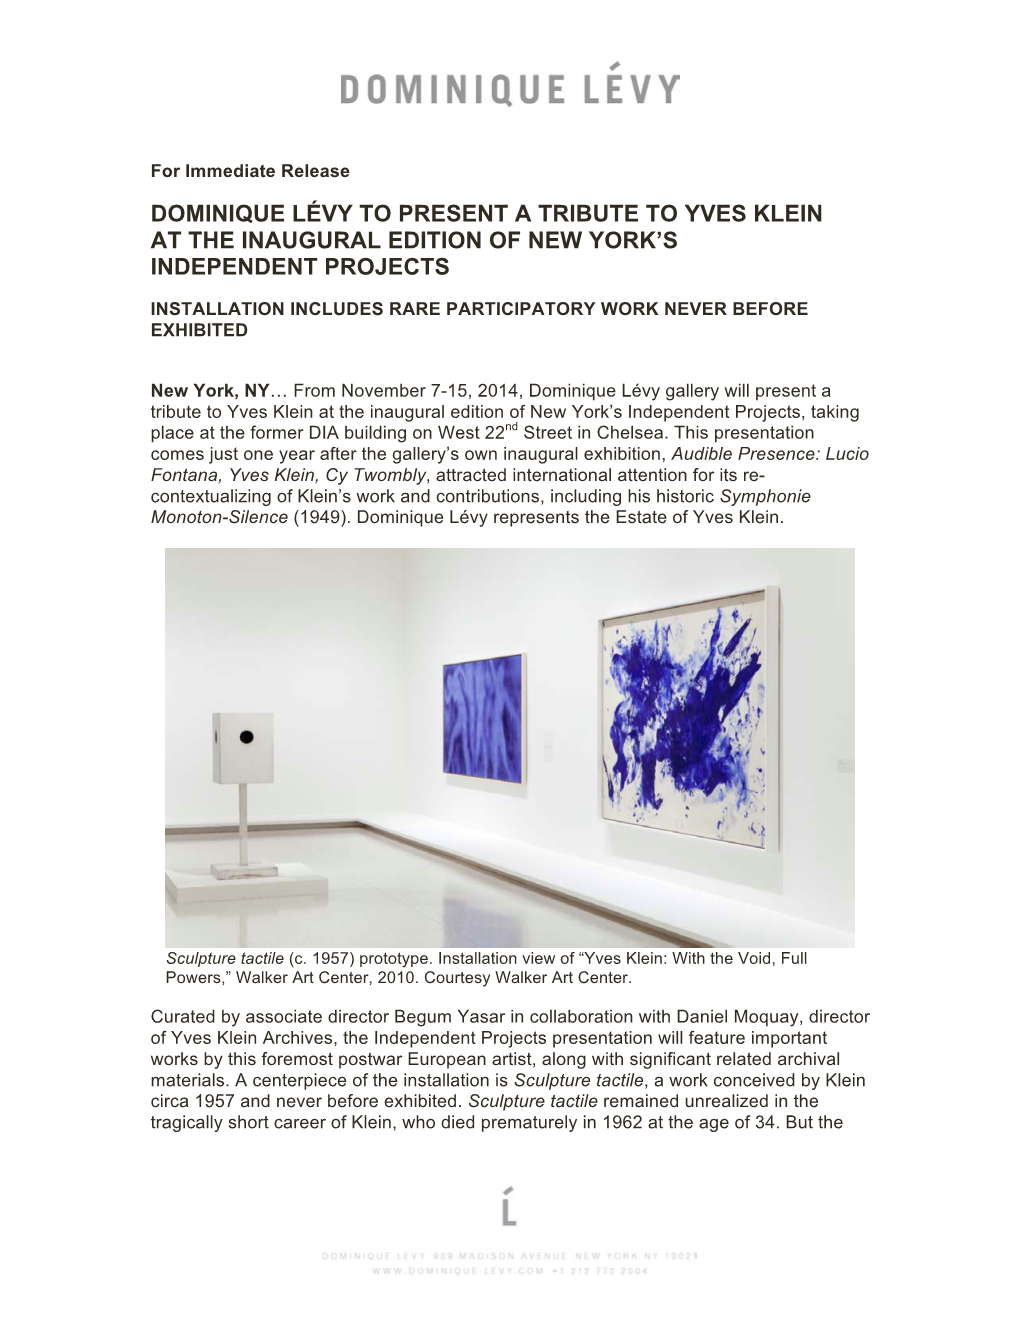 Dominique Lévy to Present a Tribute to Yves Klein at the Inaugural Edition of New York’S Independent Projects